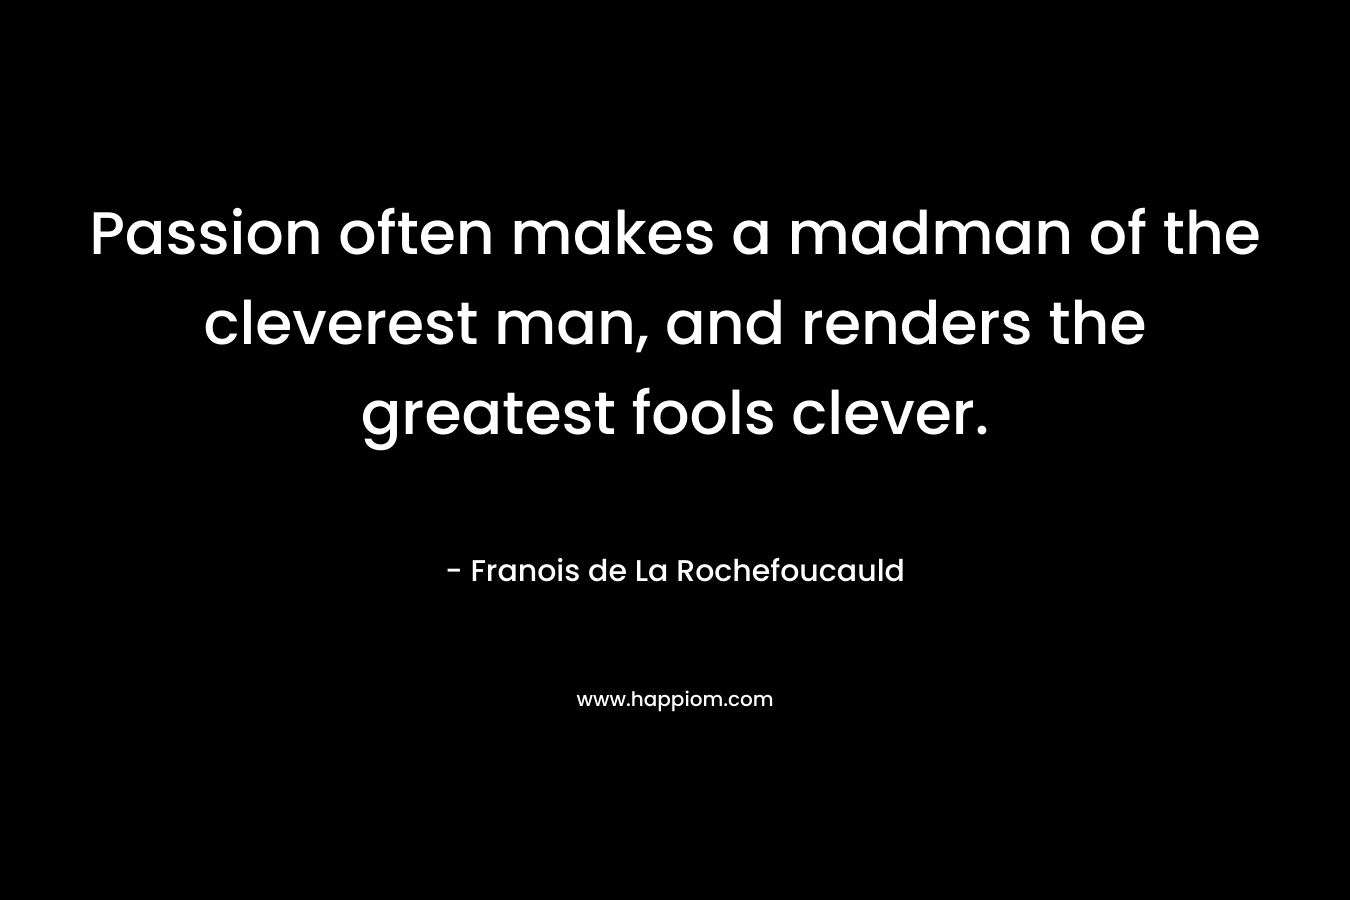 Passion often makes a madman of the cleverest man, and renders the greatest fools clever.